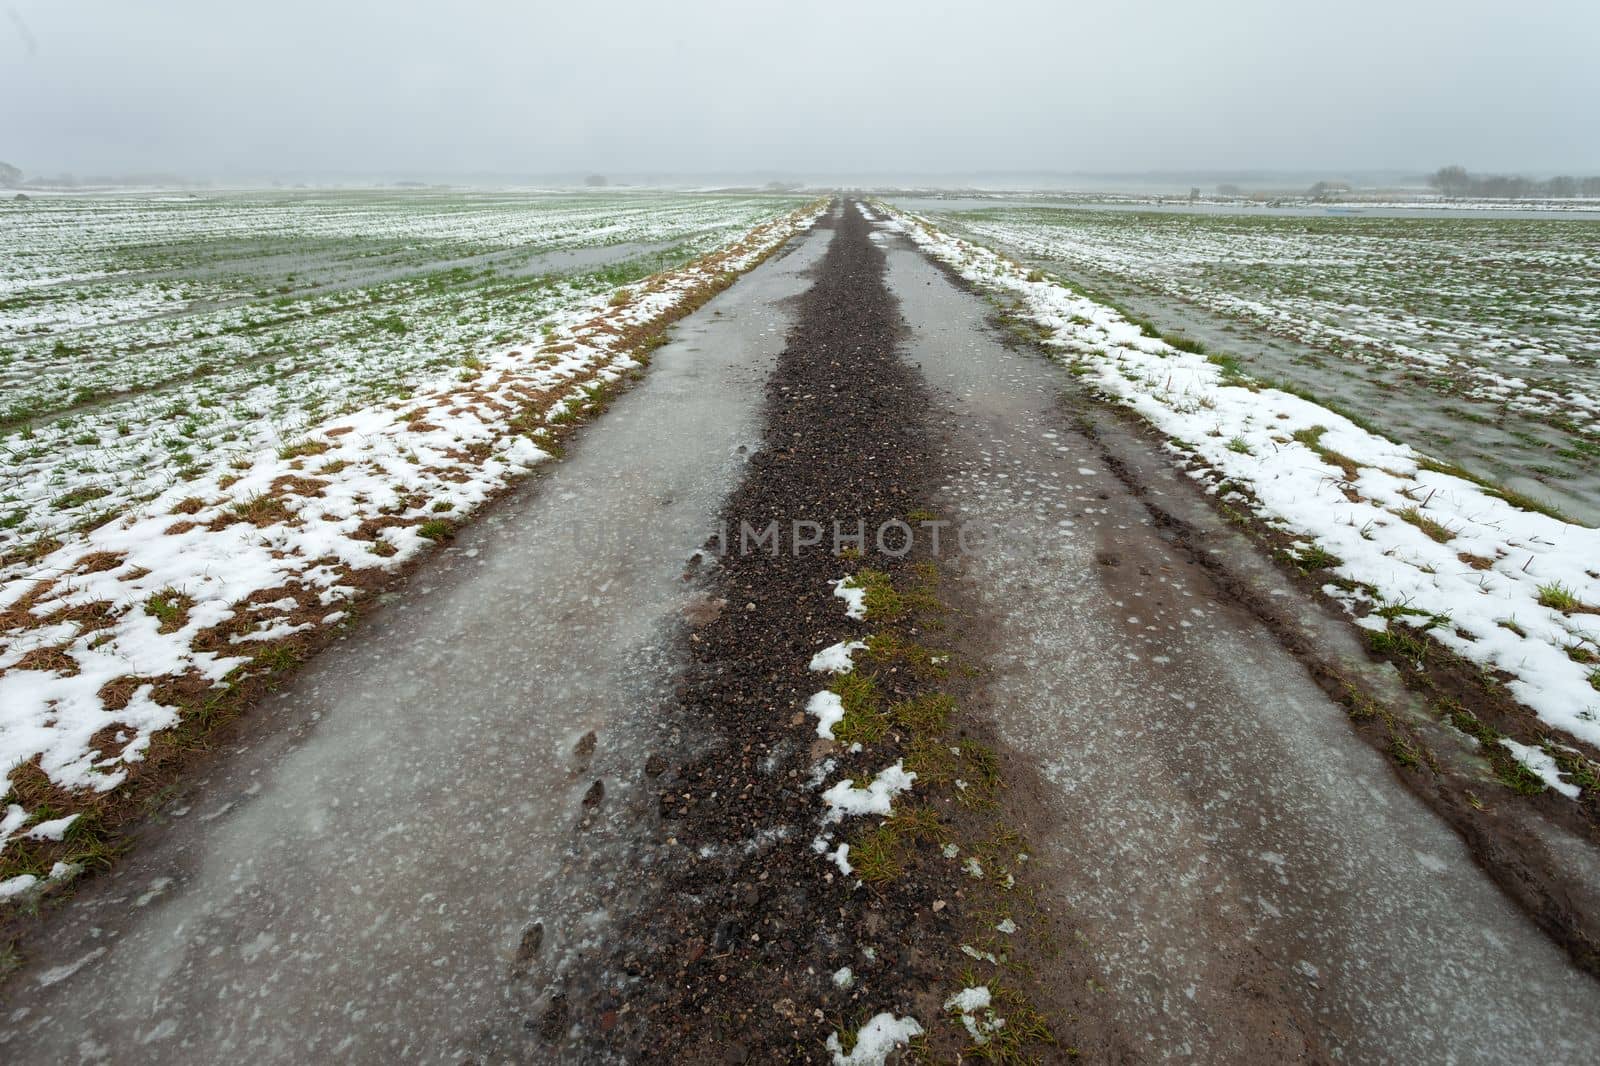 Icy dirt road through fields with snow and water, view on a foggy day, eastern Poland by darekb22